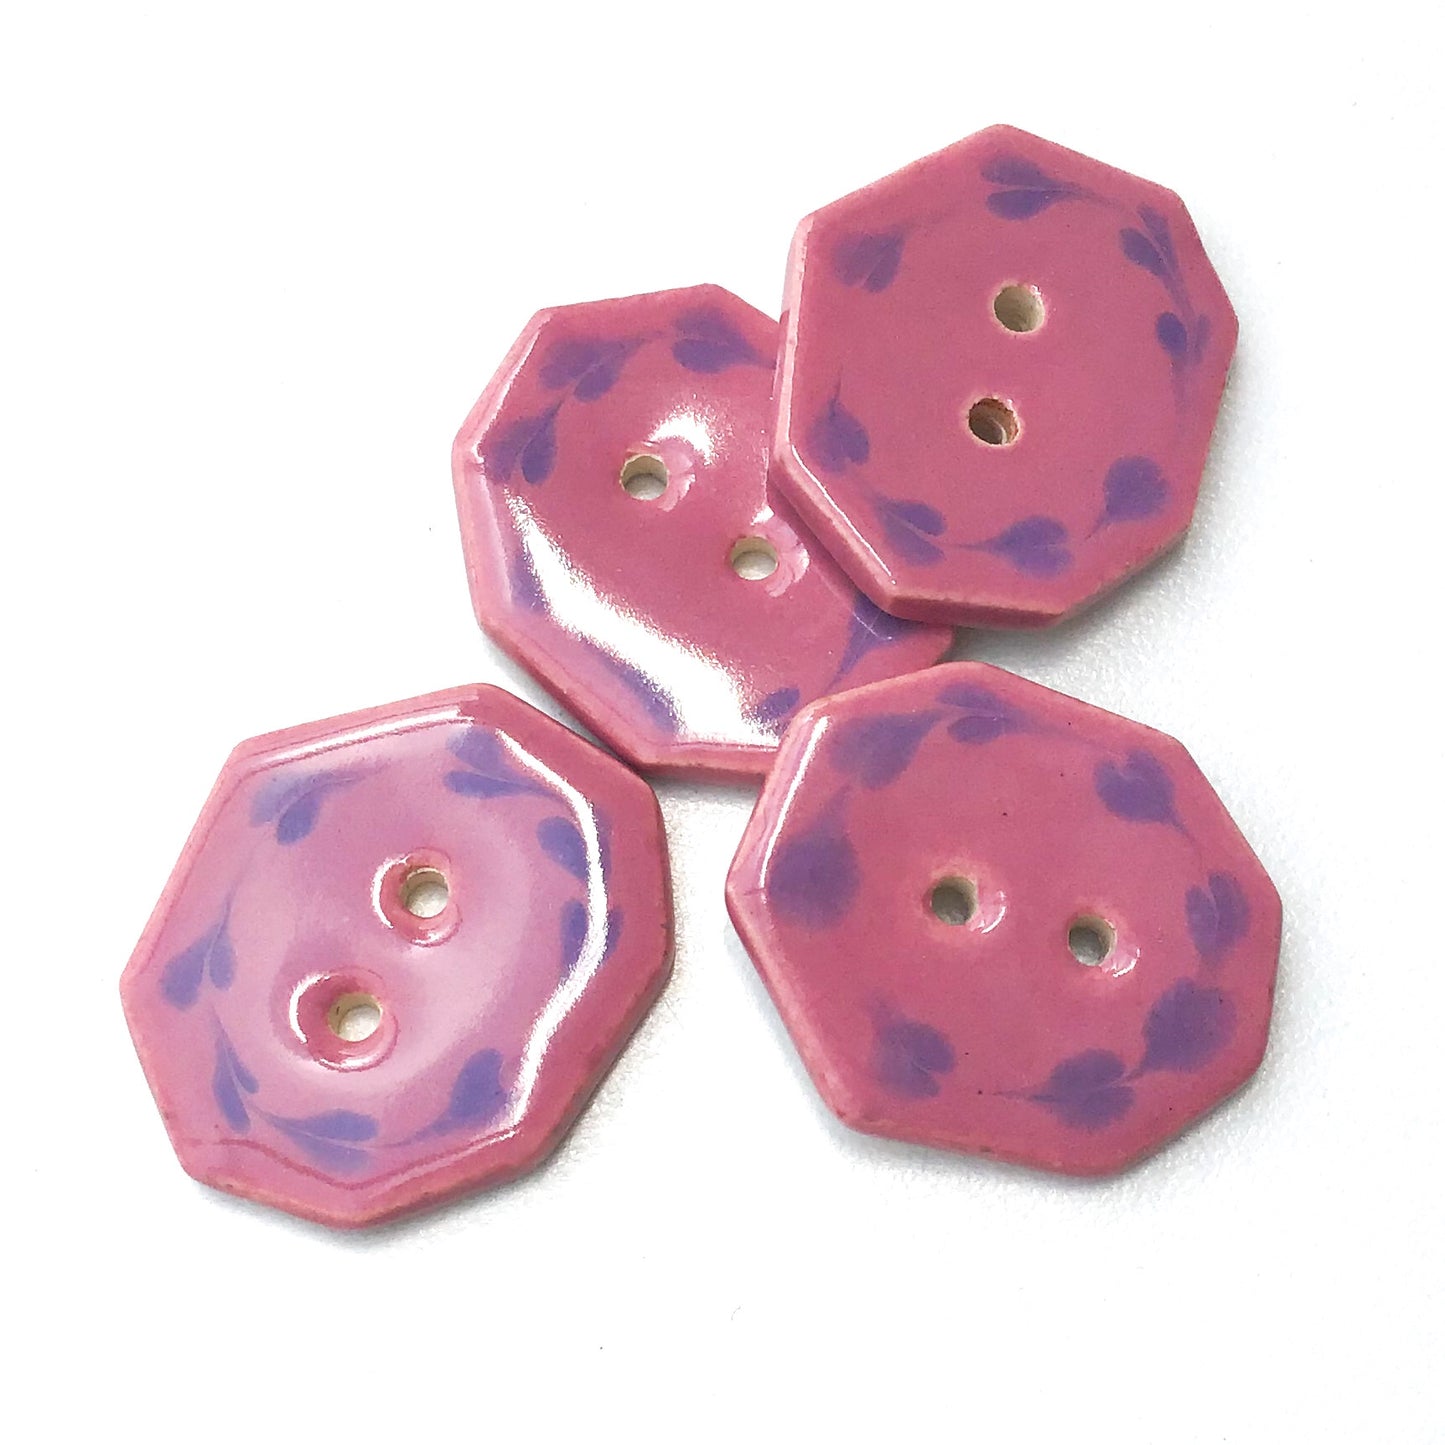 Geometric Buttons - Mauve and Purple Buttons - 3/4 x 1"- 4 Pack